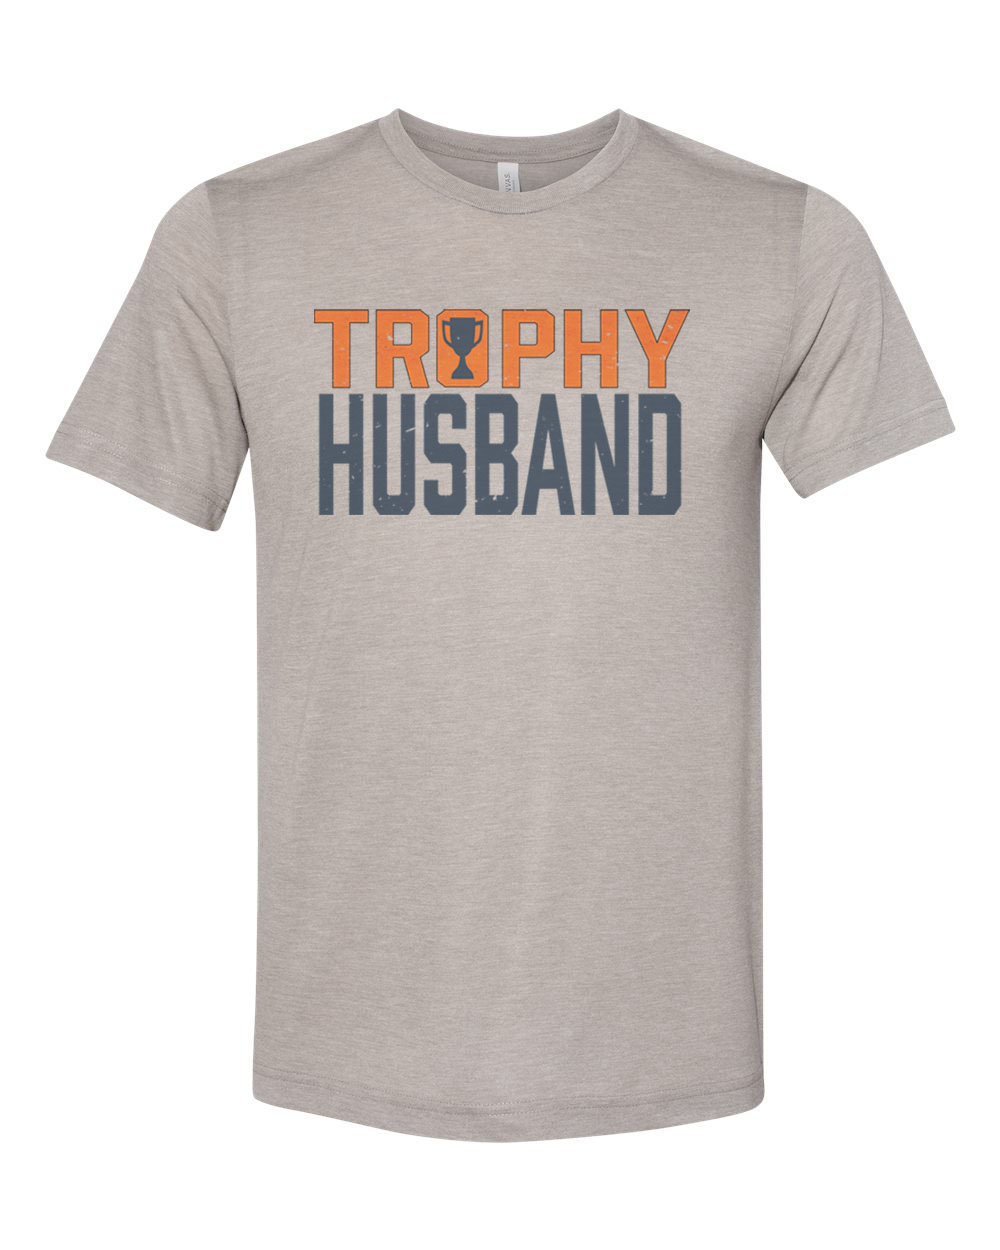 Trophy Husband Shirt, Gift For Him, Hubby Shirt, Trophy Husband, Father's Day Gift, Gift For Husband, Funny Husband Shirt, Husband Gift, Heather Stone, 2XL - image 1 of 1